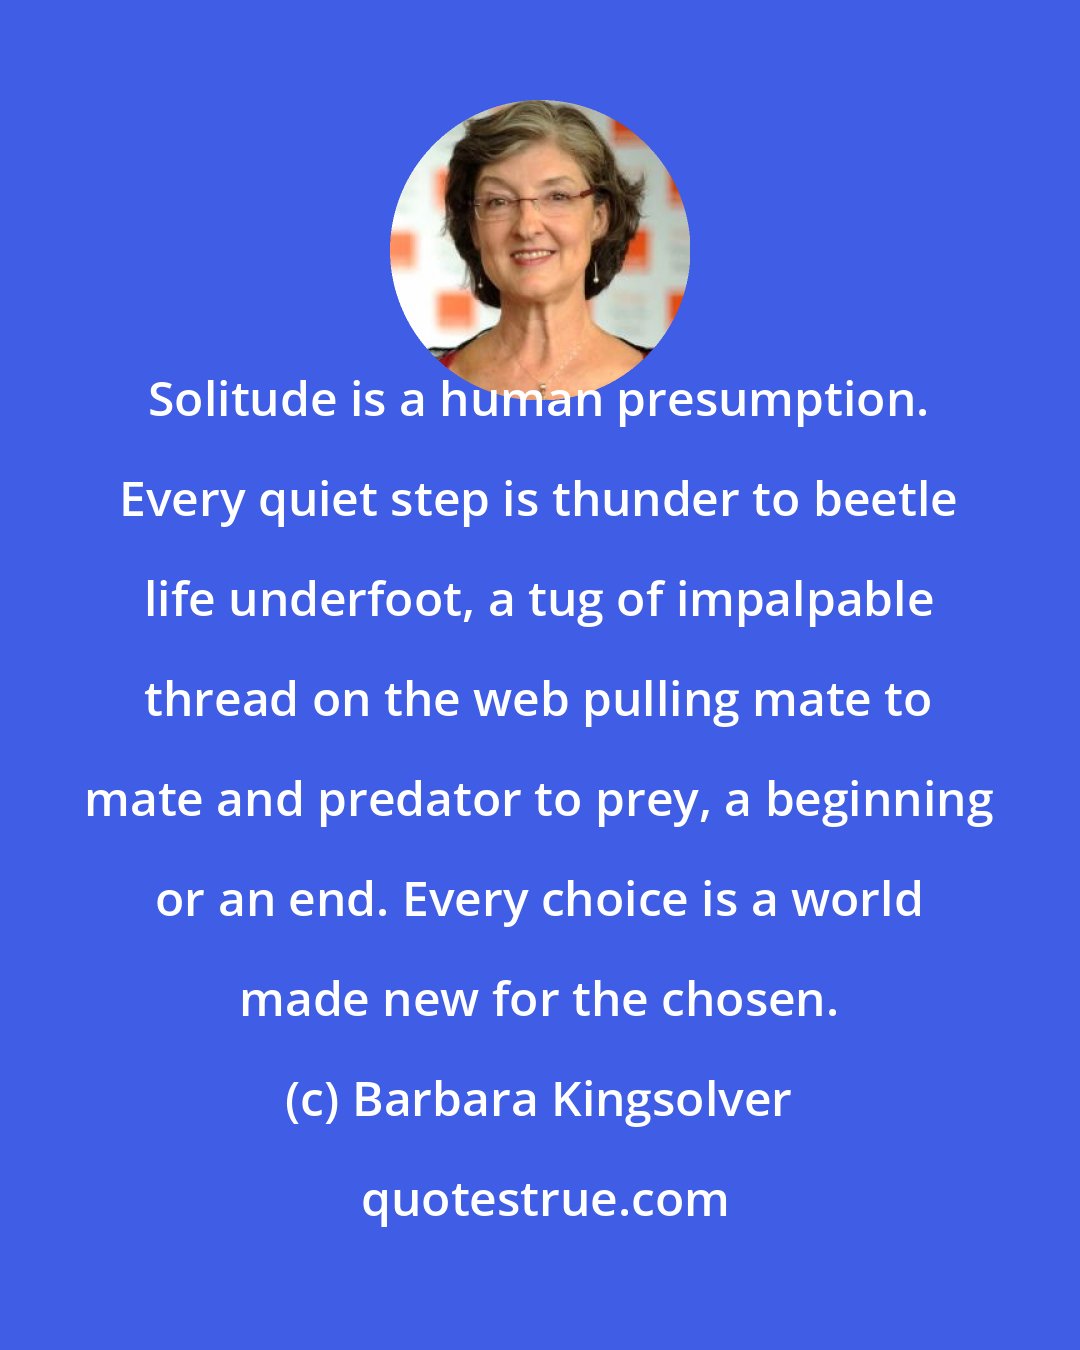 Barbara Kingsolver: Solitude is a human presumption. Every quiet step is thunder to beetle life underfoot, a tug of impalpable thread on the web pulling mate to mate and predator to prey, a beginning or an end. Every choice is a world made new for the chosen.